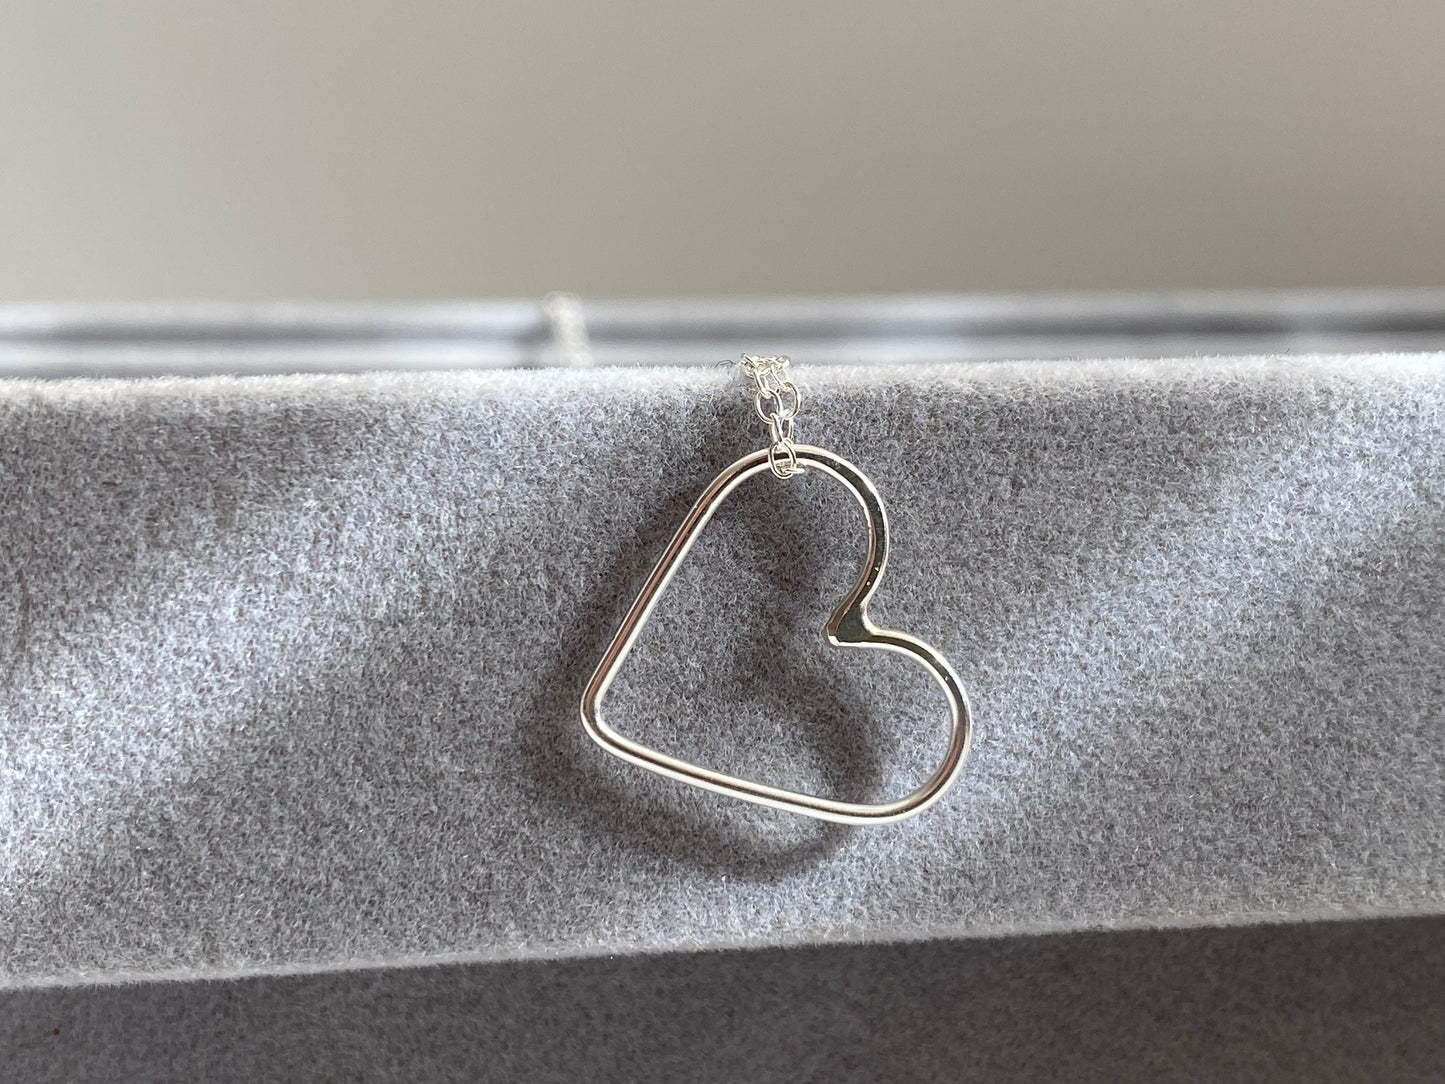 Wire Heart Necklace